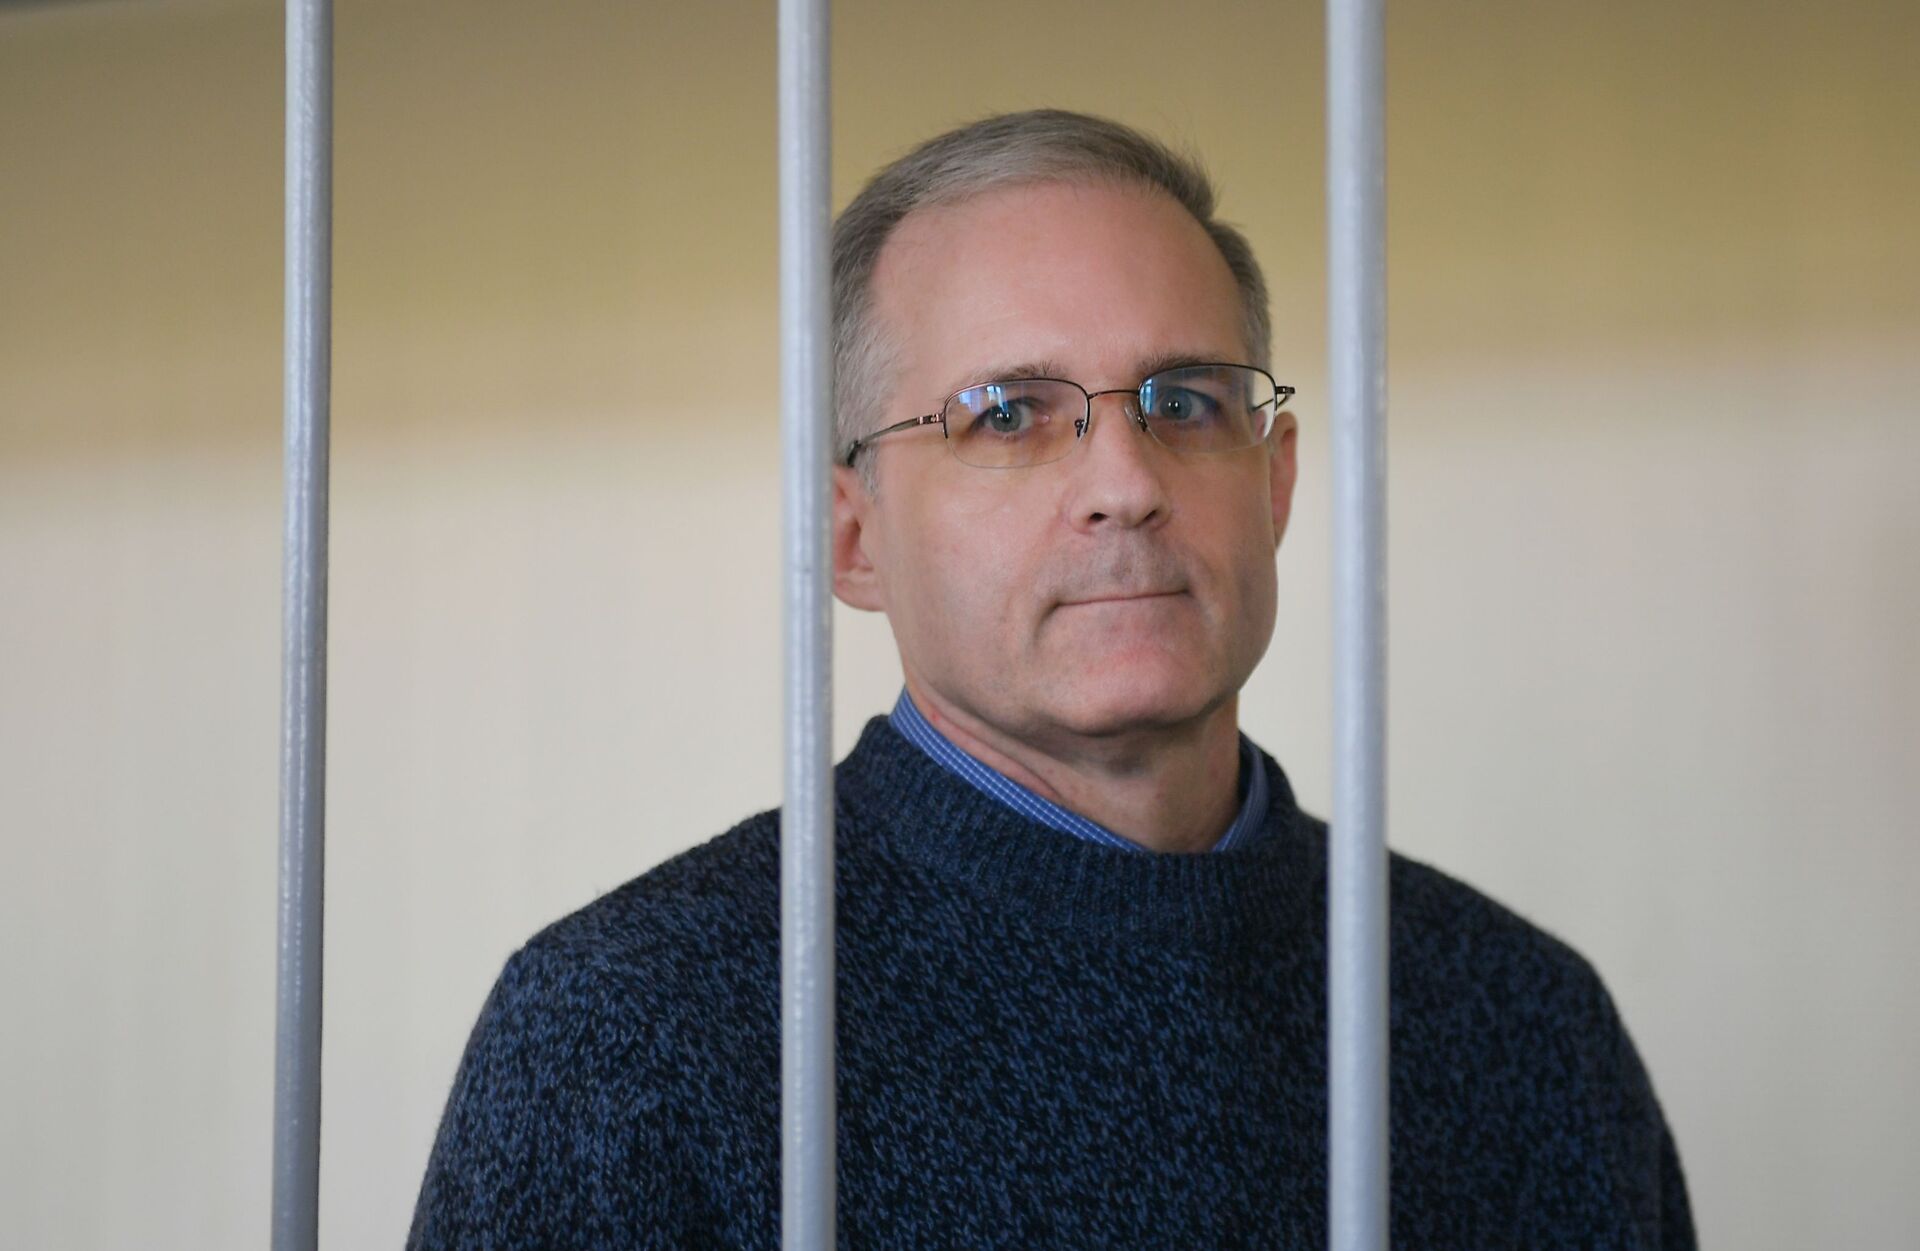 U.S. Paul Whelan waits in a courtroom as the court considers requests to extending his arrest until October 28, at the Lefortovsky Court, in Moscow, Russia. Whelan was accused of espionage and detained by the Russian Federal Security Service on December 28, 2018 - Sputnik International, 1920, 19.09.2022